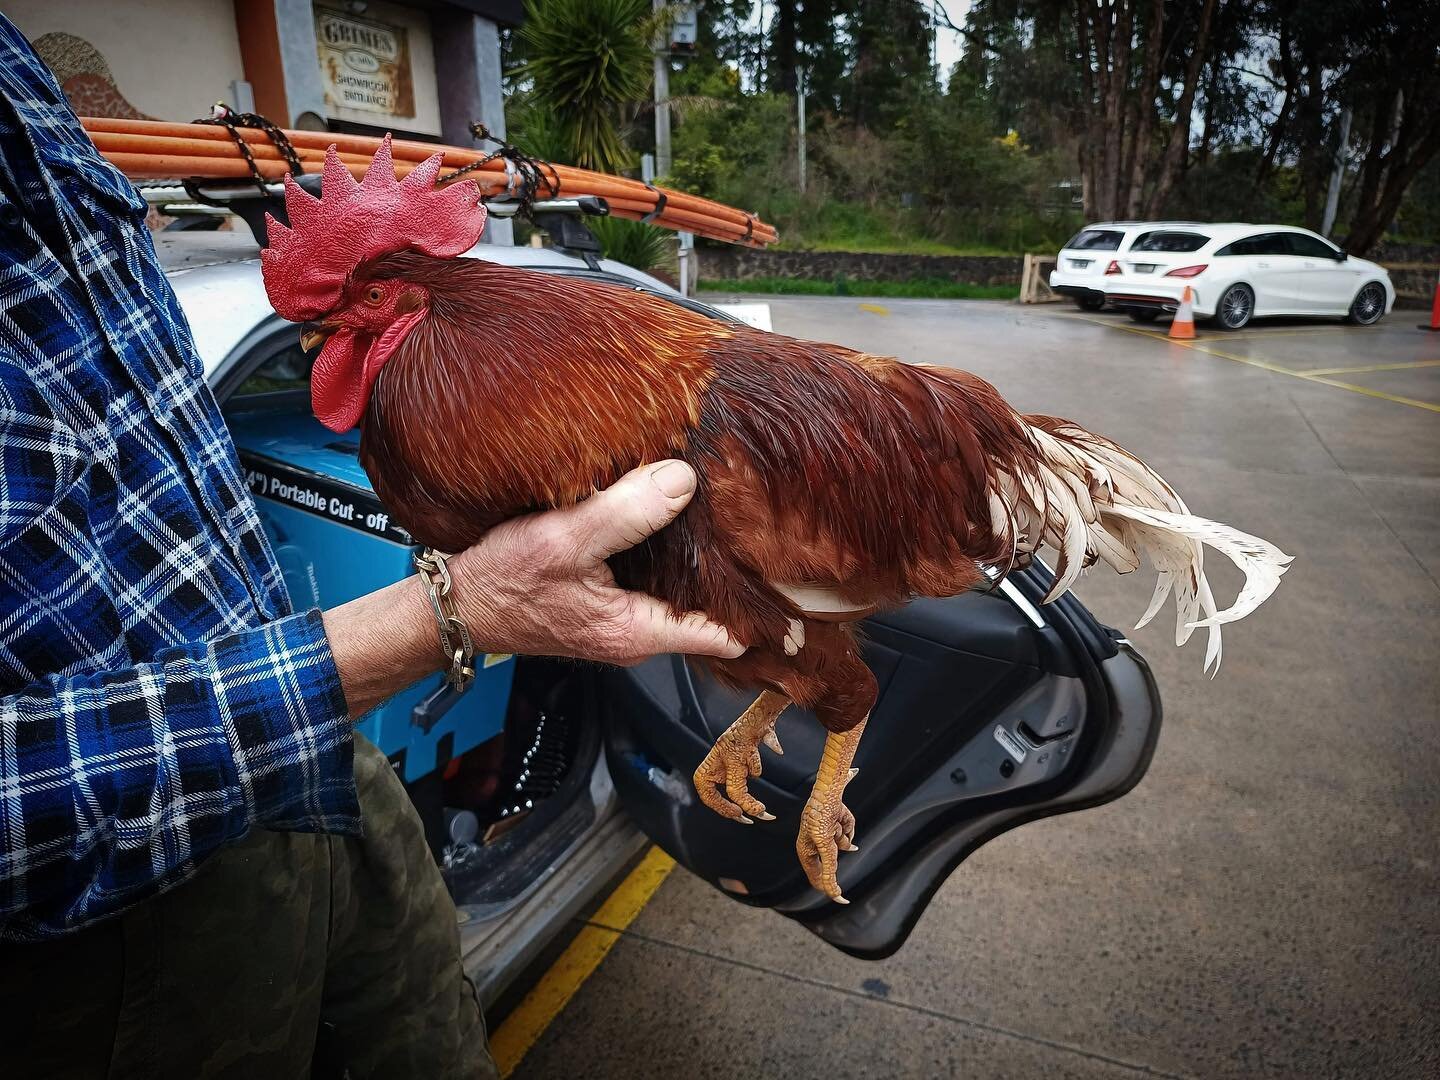 A visit from Alby the pet rooster.